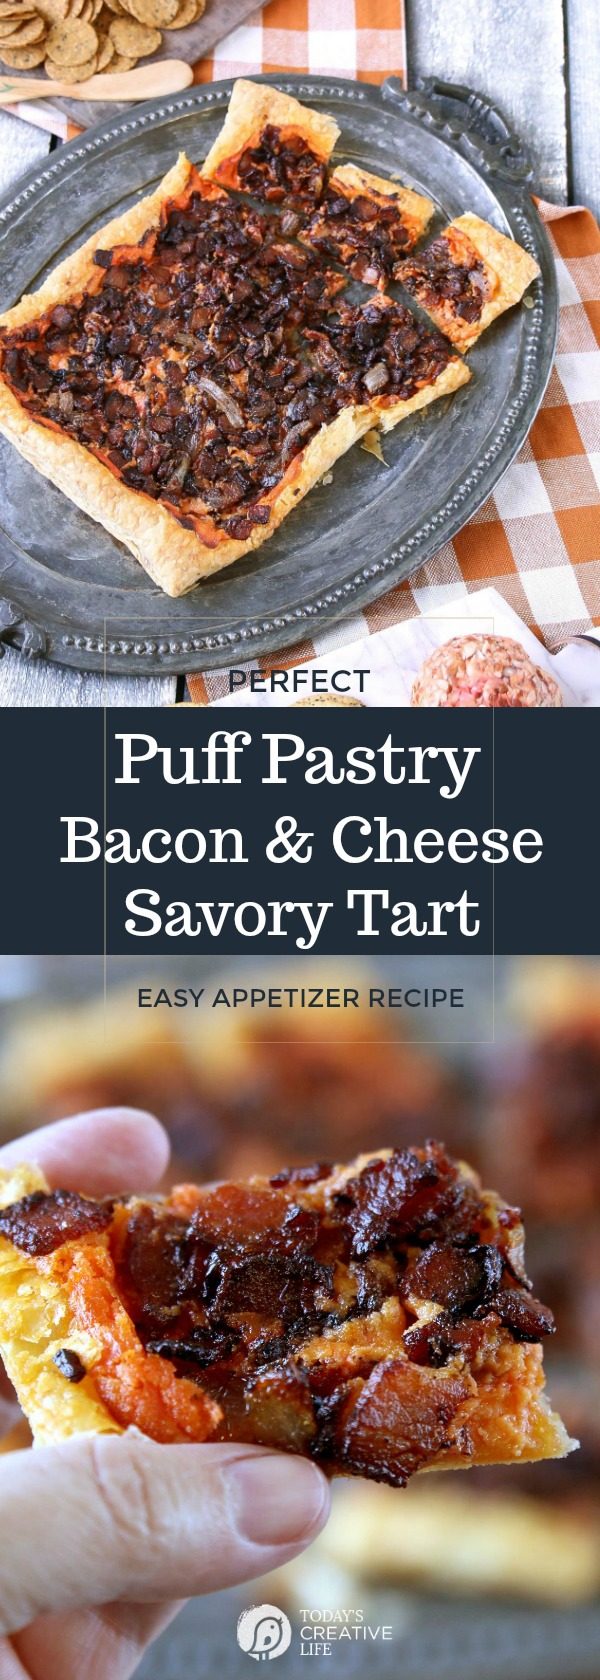 Puff Pastry Savory Tart Recipe | Easy Appetizer Recipes | Appetizers for a Crowd | Bacon and Caramelized Onion Appetizers | Party Food | Holiday Party Recipes and Ideas | Puff Pastry Recipes | Kaukauna Spreadable Cheese Recipes | TodaysCreativeLife.com